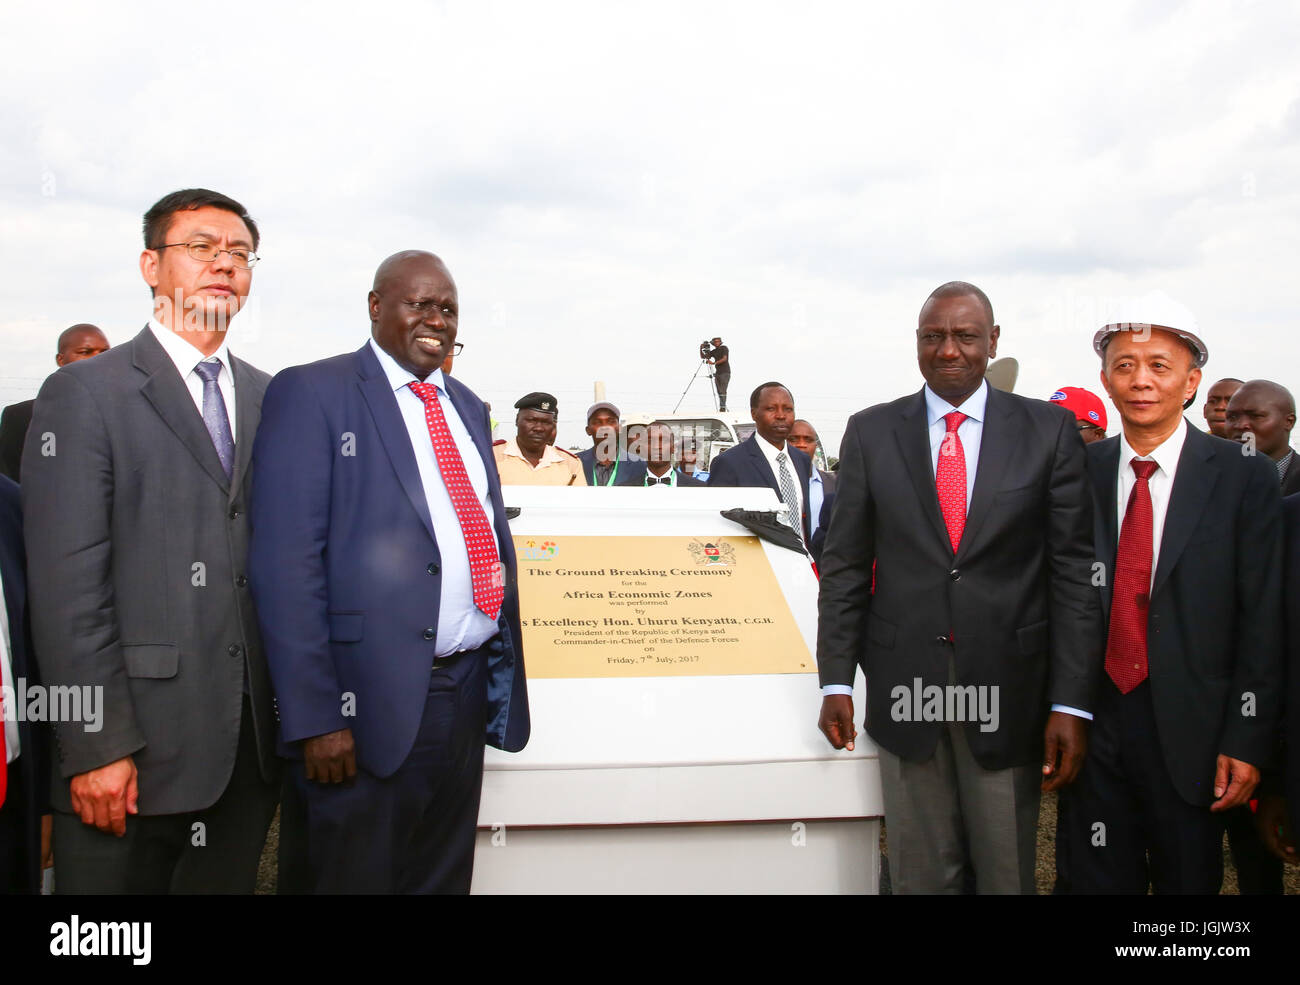 (170707) -- ELDORET(KENYA), July 7, 2017 (Xinhua) -- Kenyan Deputy President William Ruto (2nd R, front), Counsellor of the Chinese Embassy in Kenya Yao Ming (1st L, front) and other guests unveil a commemorative plaque at the launching ceremony of the Special Economic Zone project in Eldoret, Kenya, on July 7, 2017. Kenya on Friday launched a Special Economic Zone (SEZ) project that is expected to attract about 2 billion U.S. dollars of foreign investments. The project is a joint venture between Kenyan-based company Africa Economic Zone and China's Guangdong New South Group. (Xinhua/Pan Siwei Stock Photo